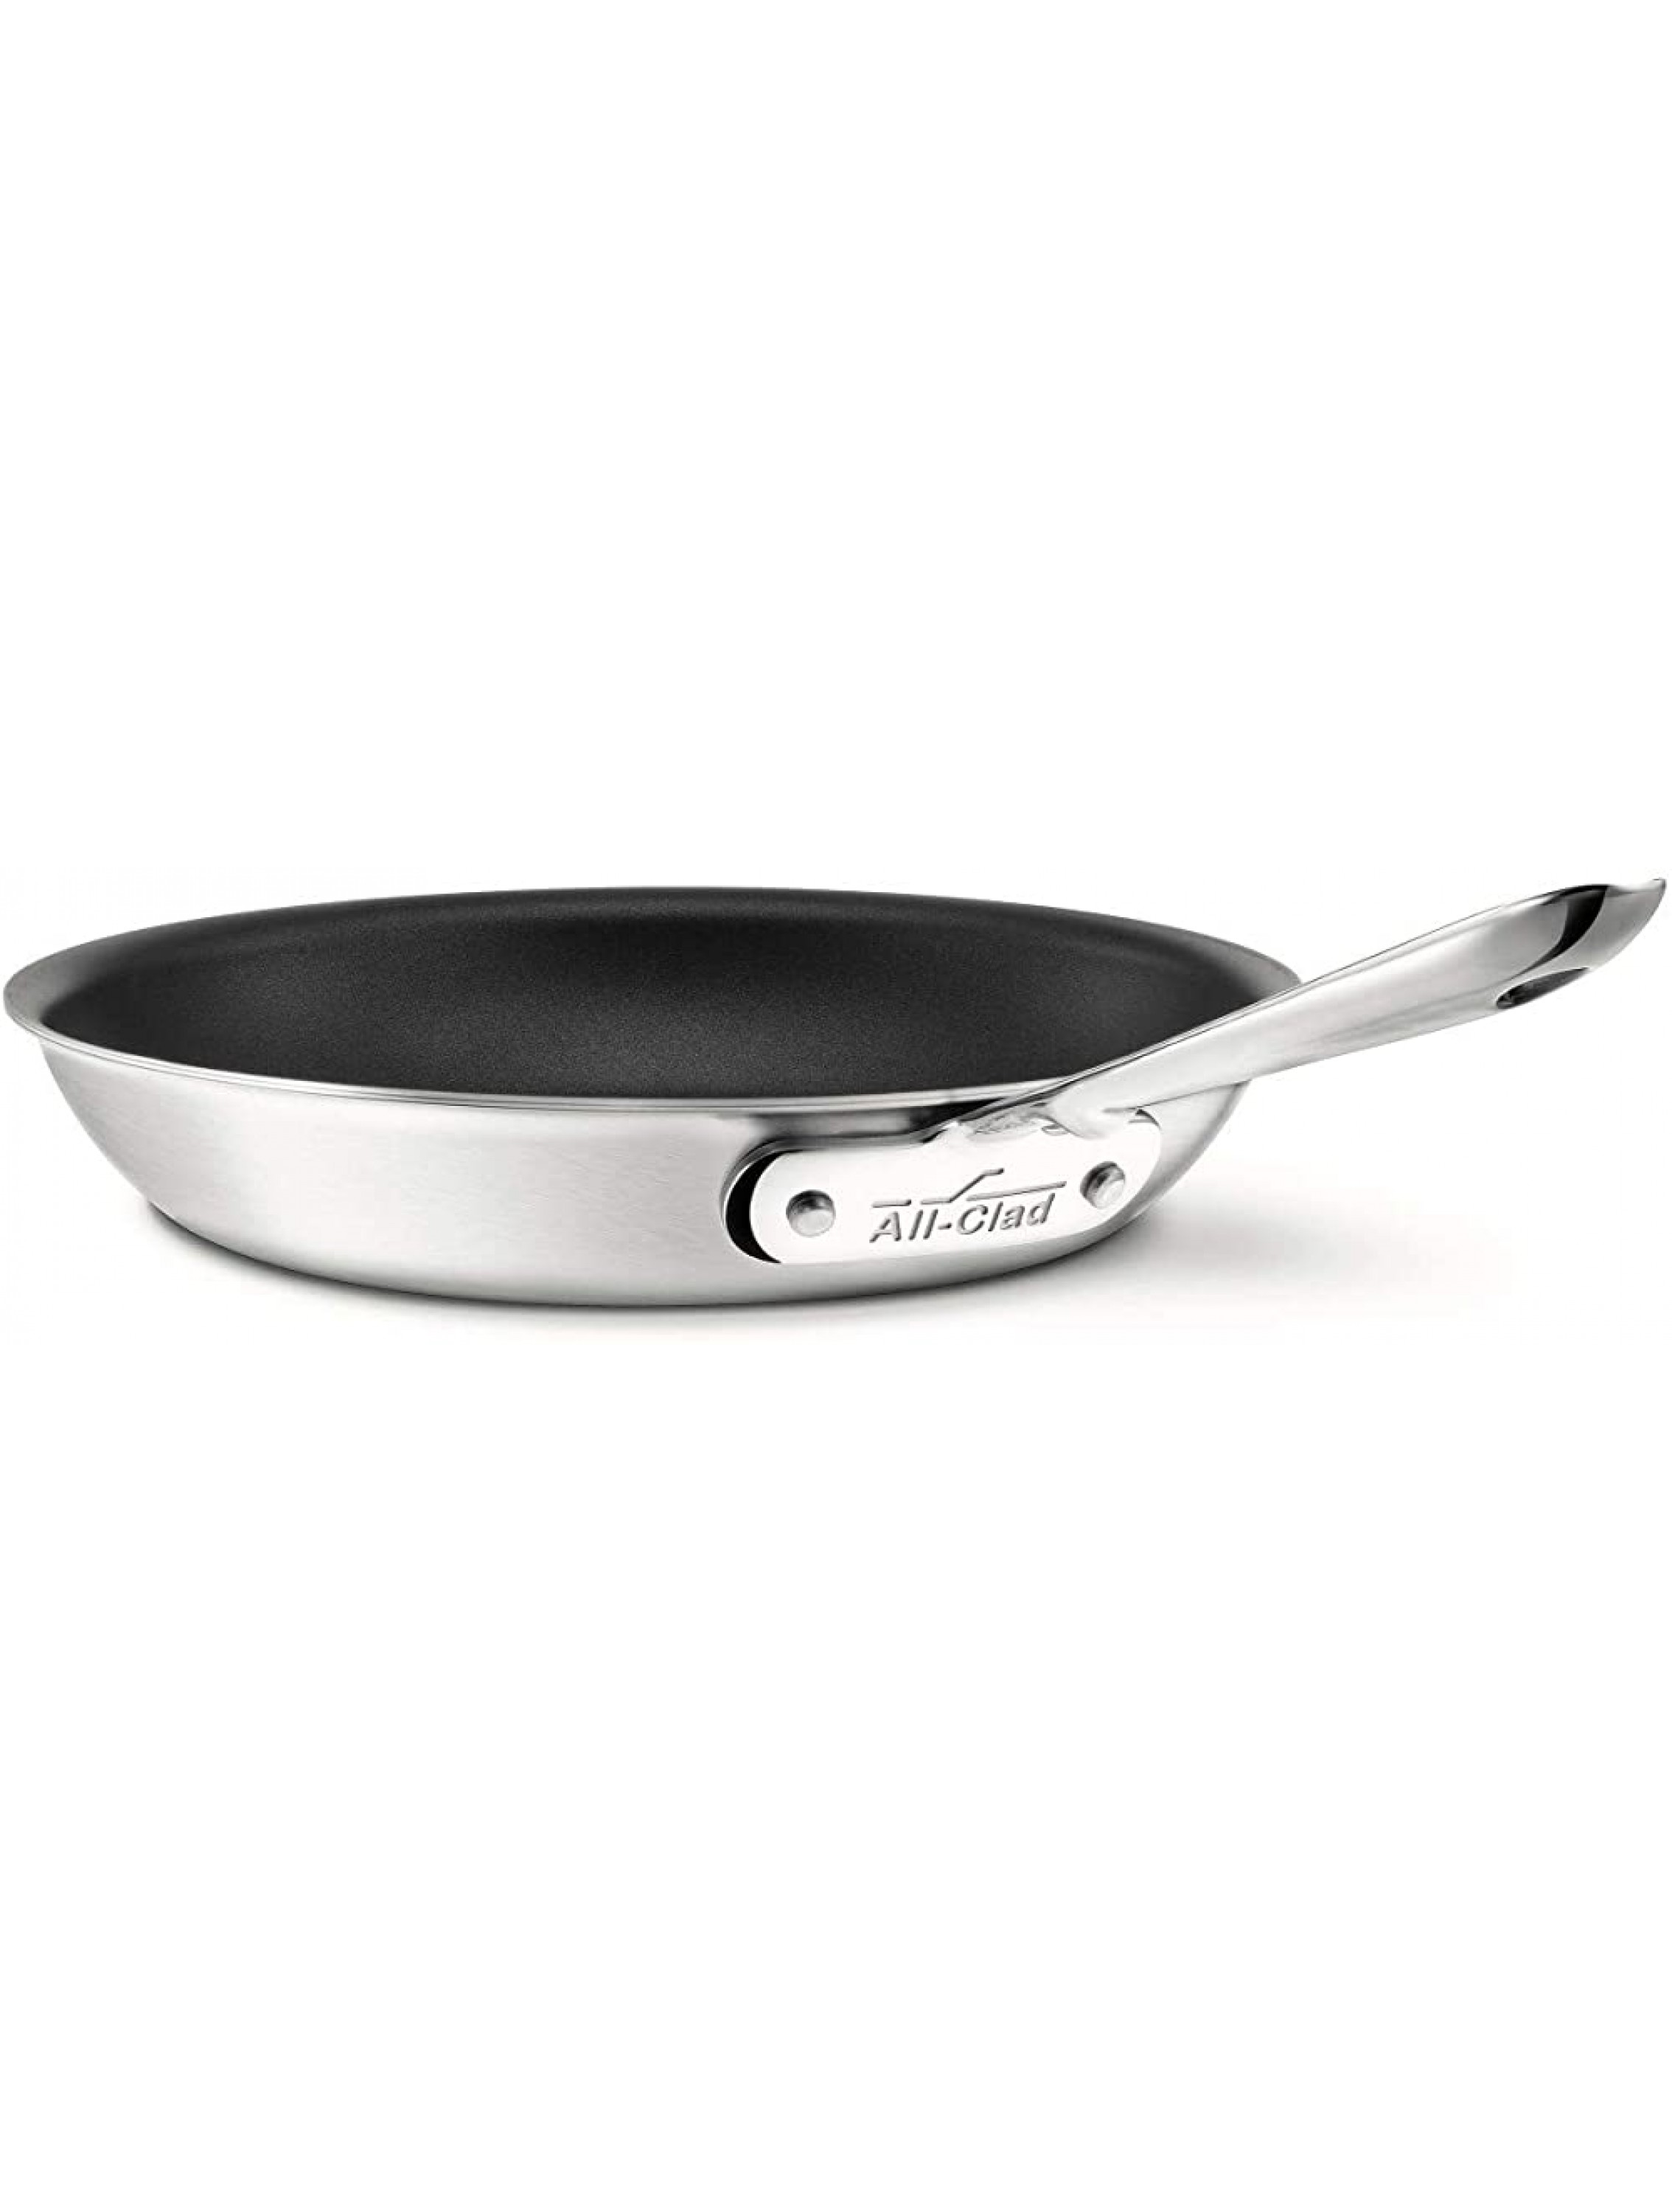 All-Clad BD55110NSR2 D5 Brushed 18 10 Stainless Steel 5-Ply Bonded Dishwasher Safe Nonstick Fry Pan Saute Pan Cookware 10-Inch Silver - B80YHK22G